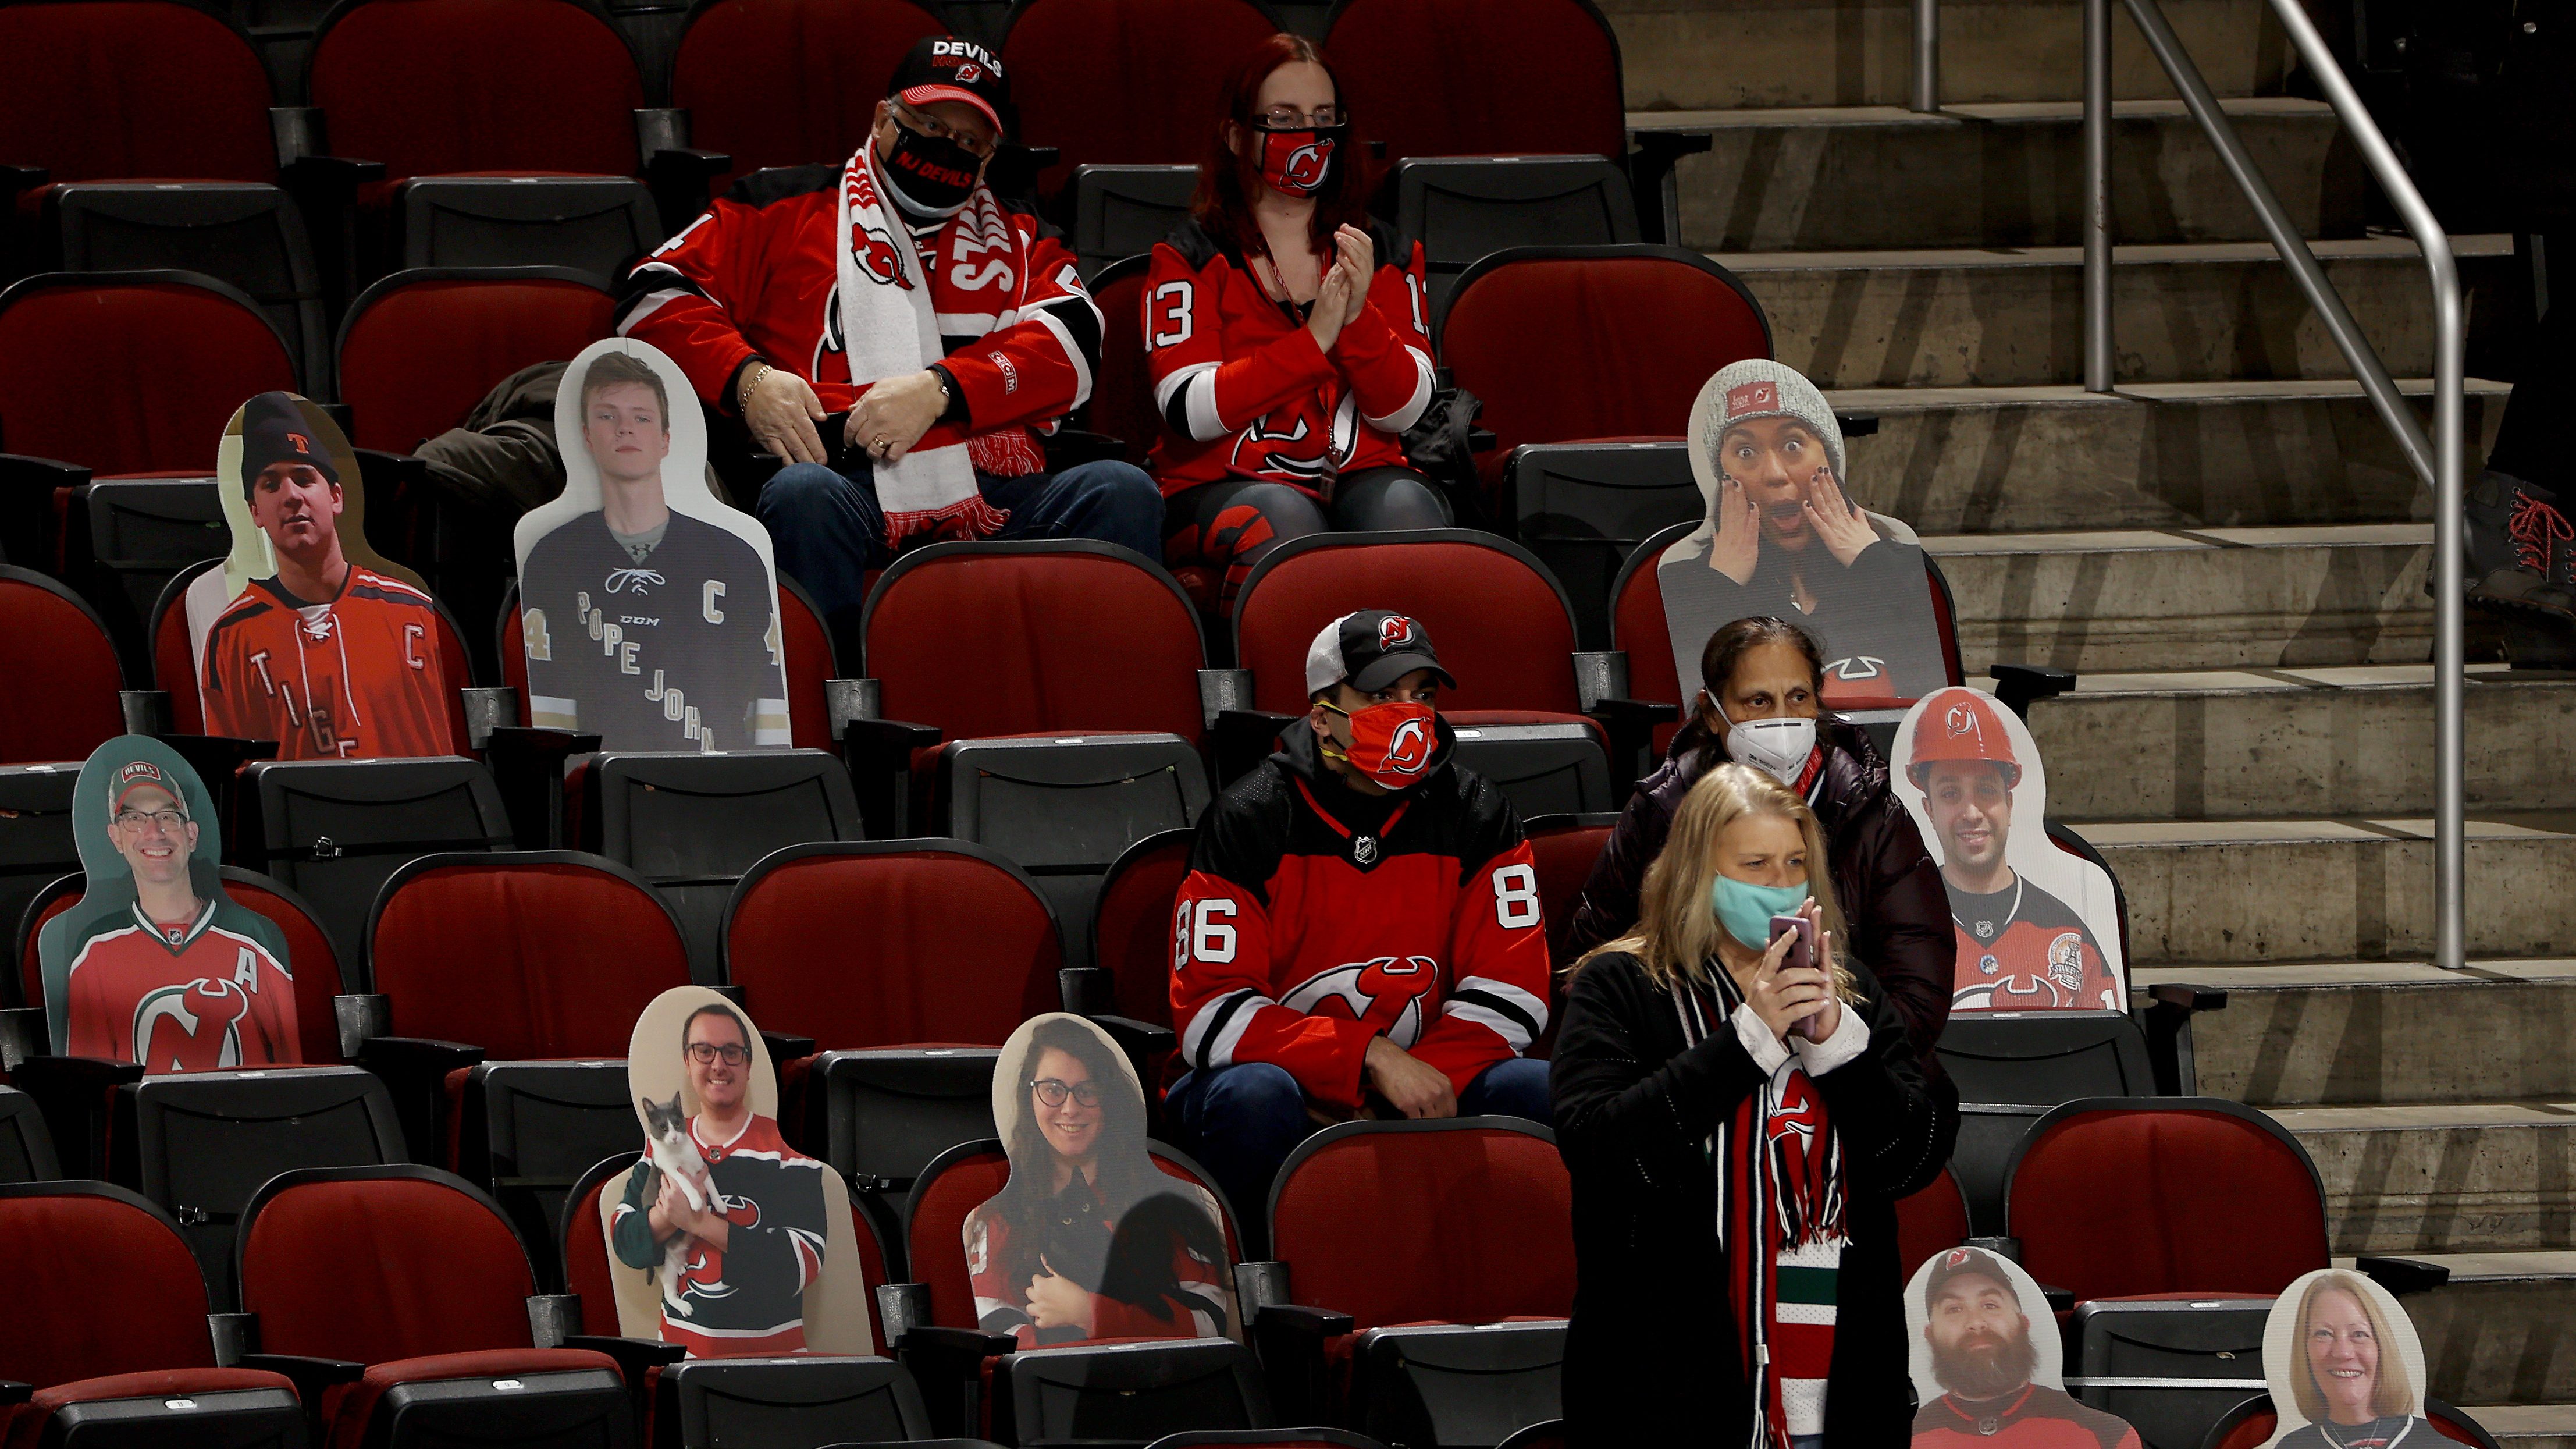 NJ COVID Update: New Jersey Devils fans return to Prudential